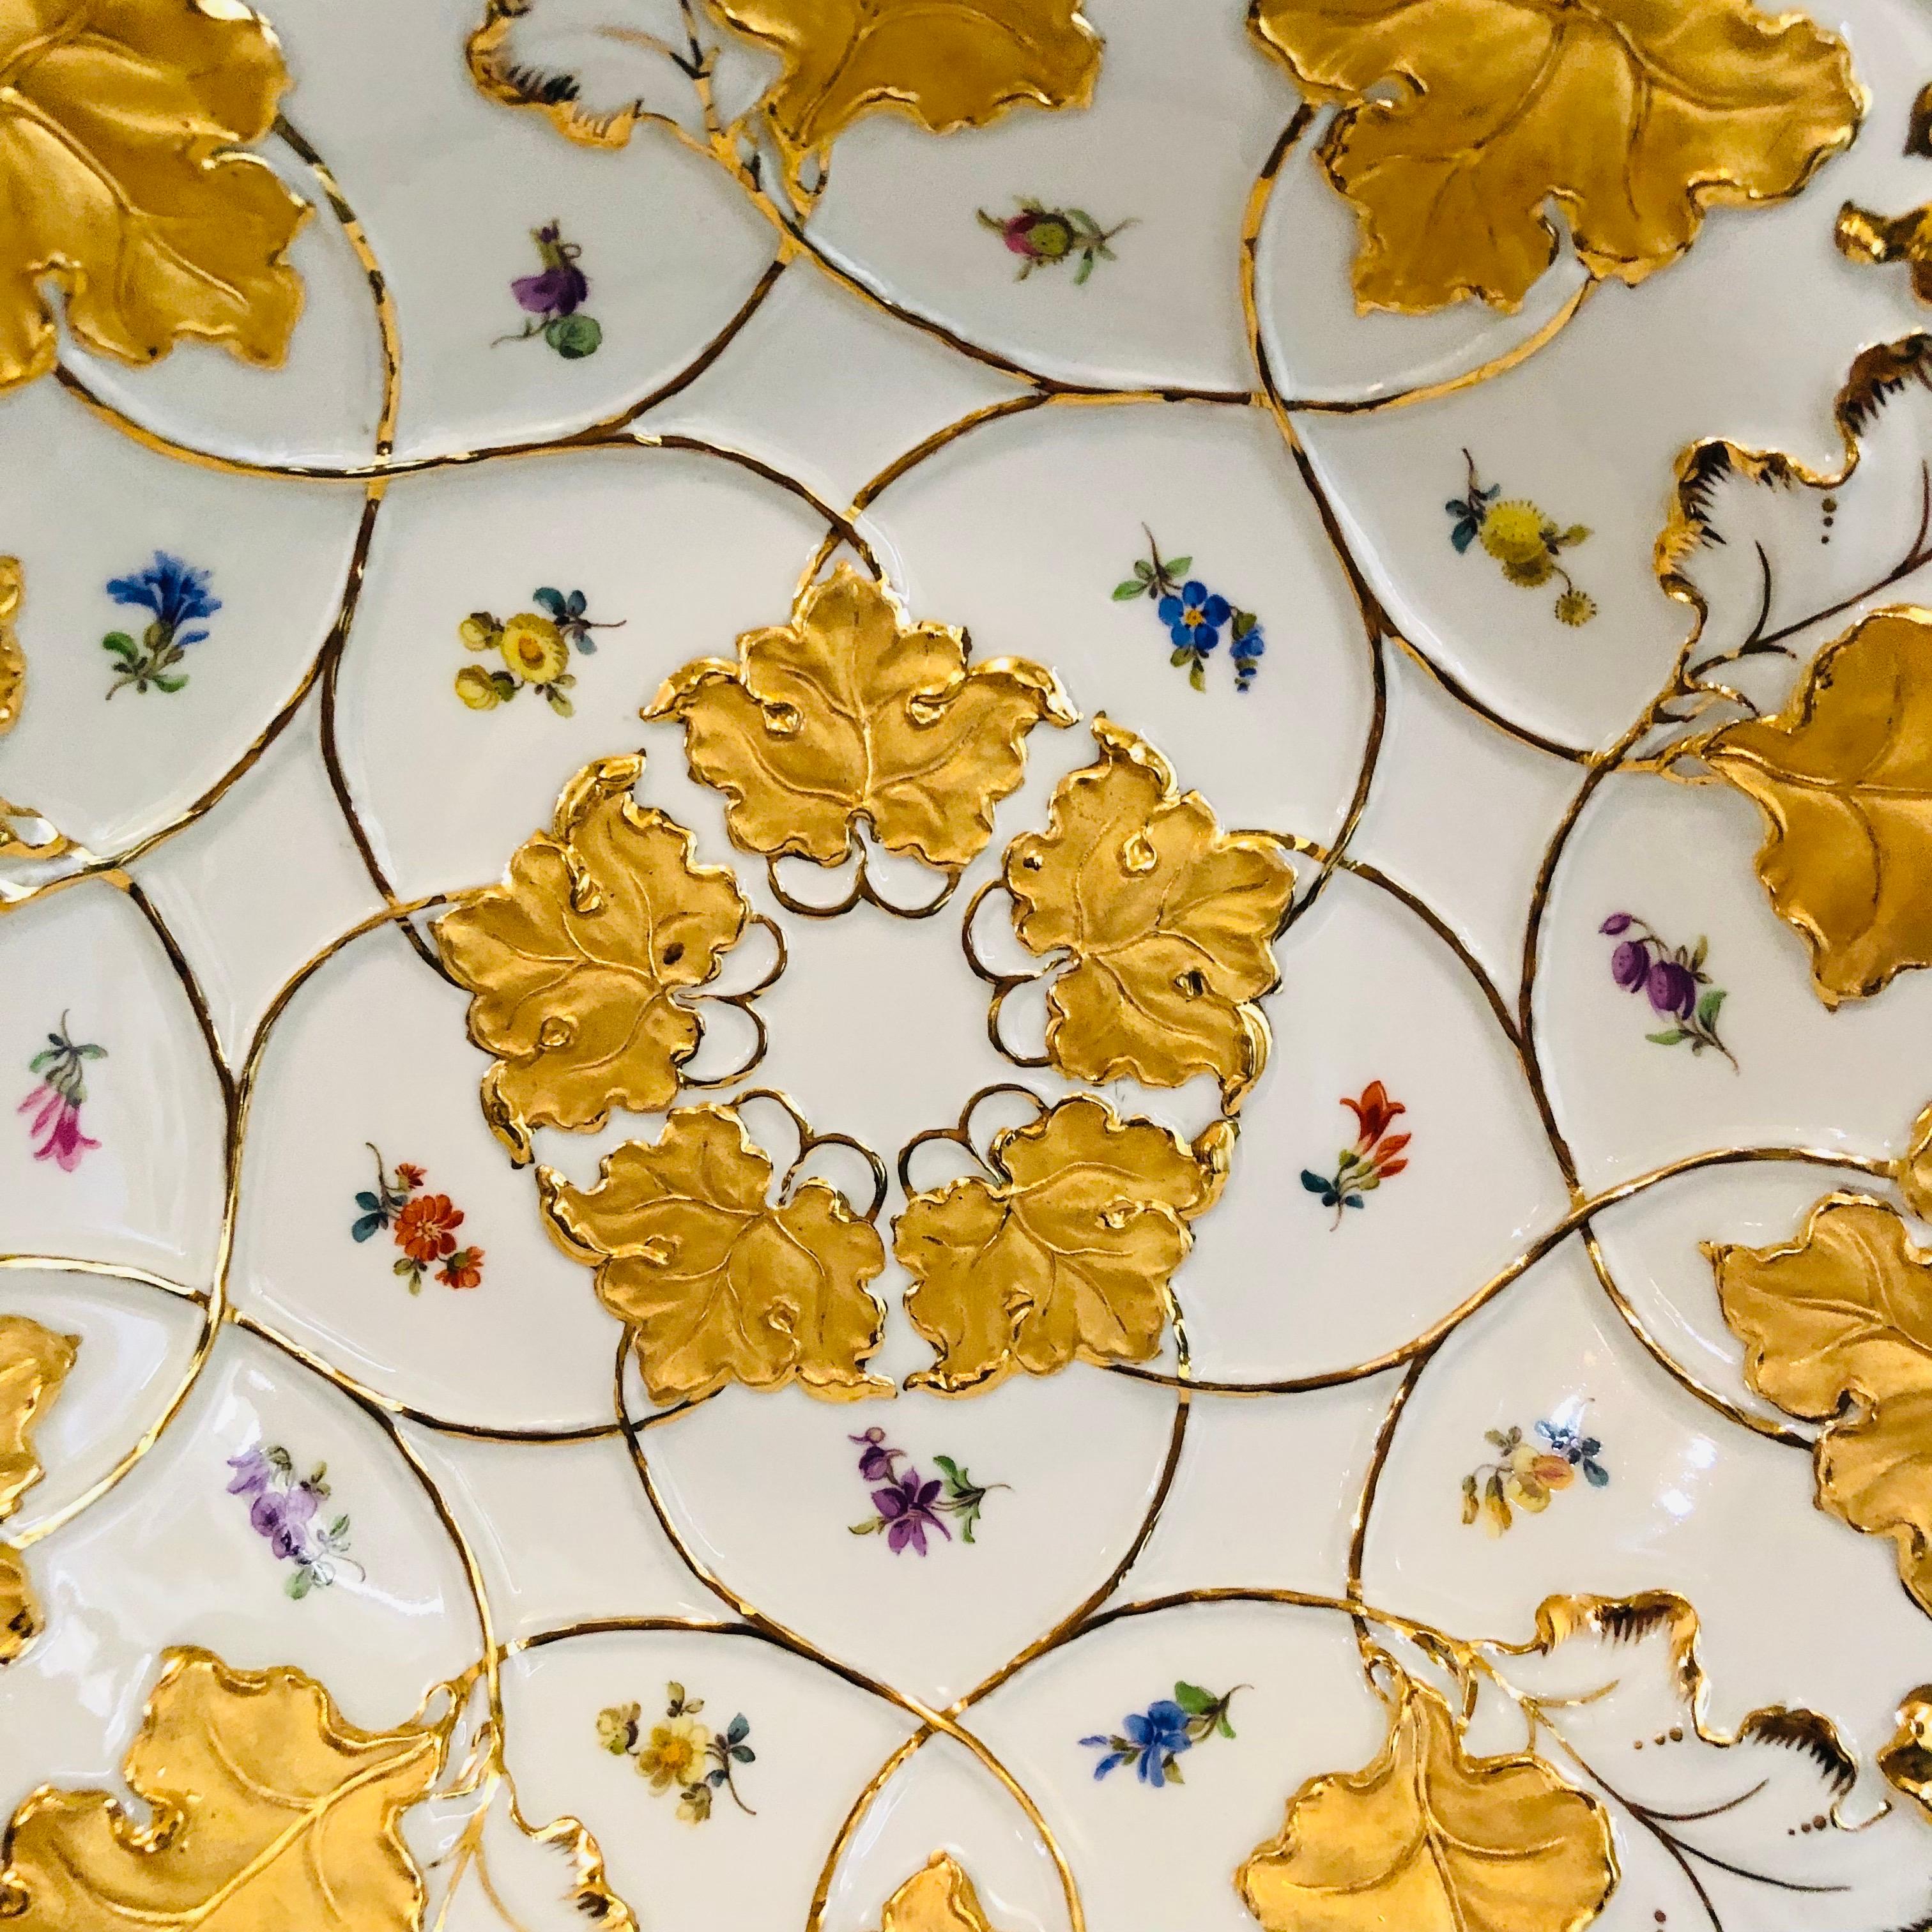 Porcelain Meissen Charger Painted with Gilded Acanthus Leaves and Multicolored Flowers